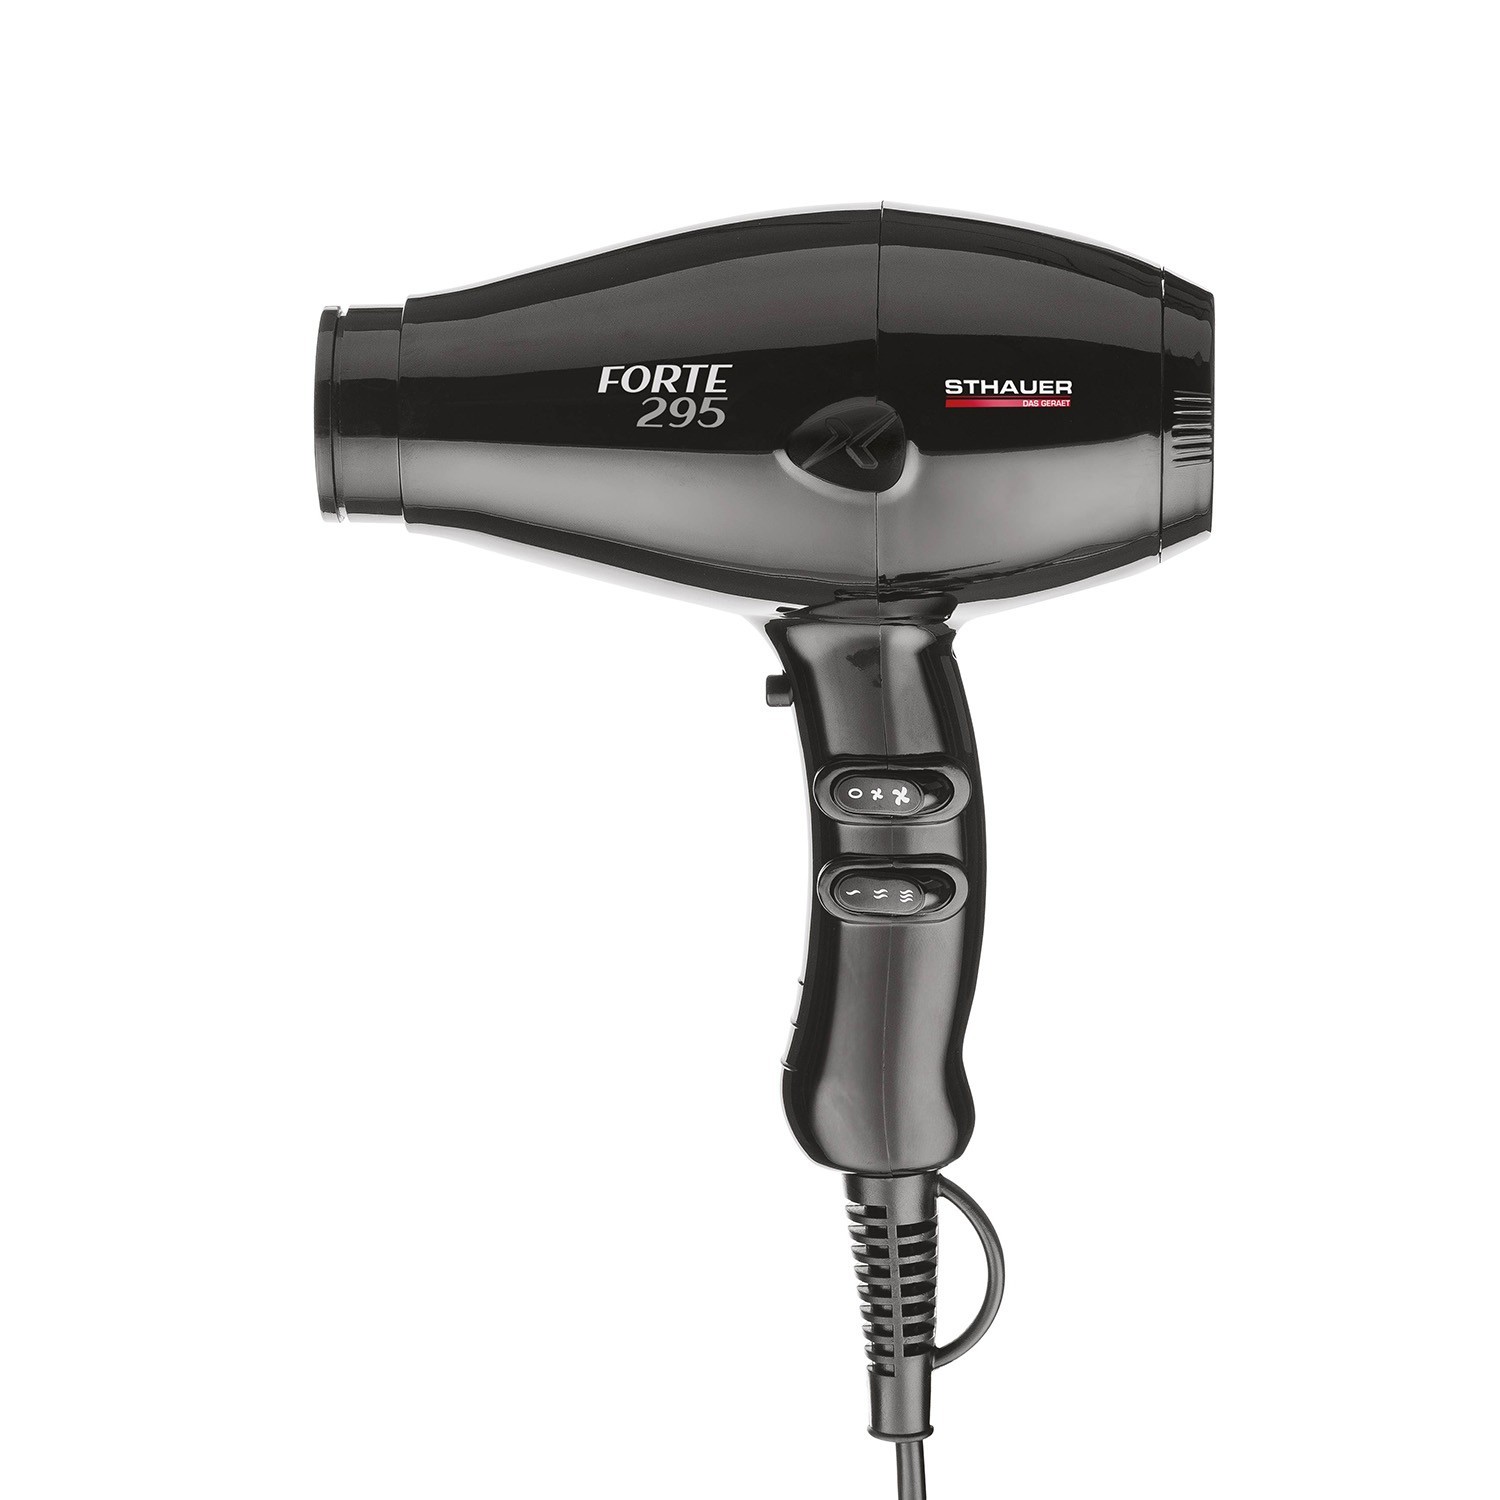 Xanitlia Sthauer Forte 295 Compact 2000W Dryer with Diffuser